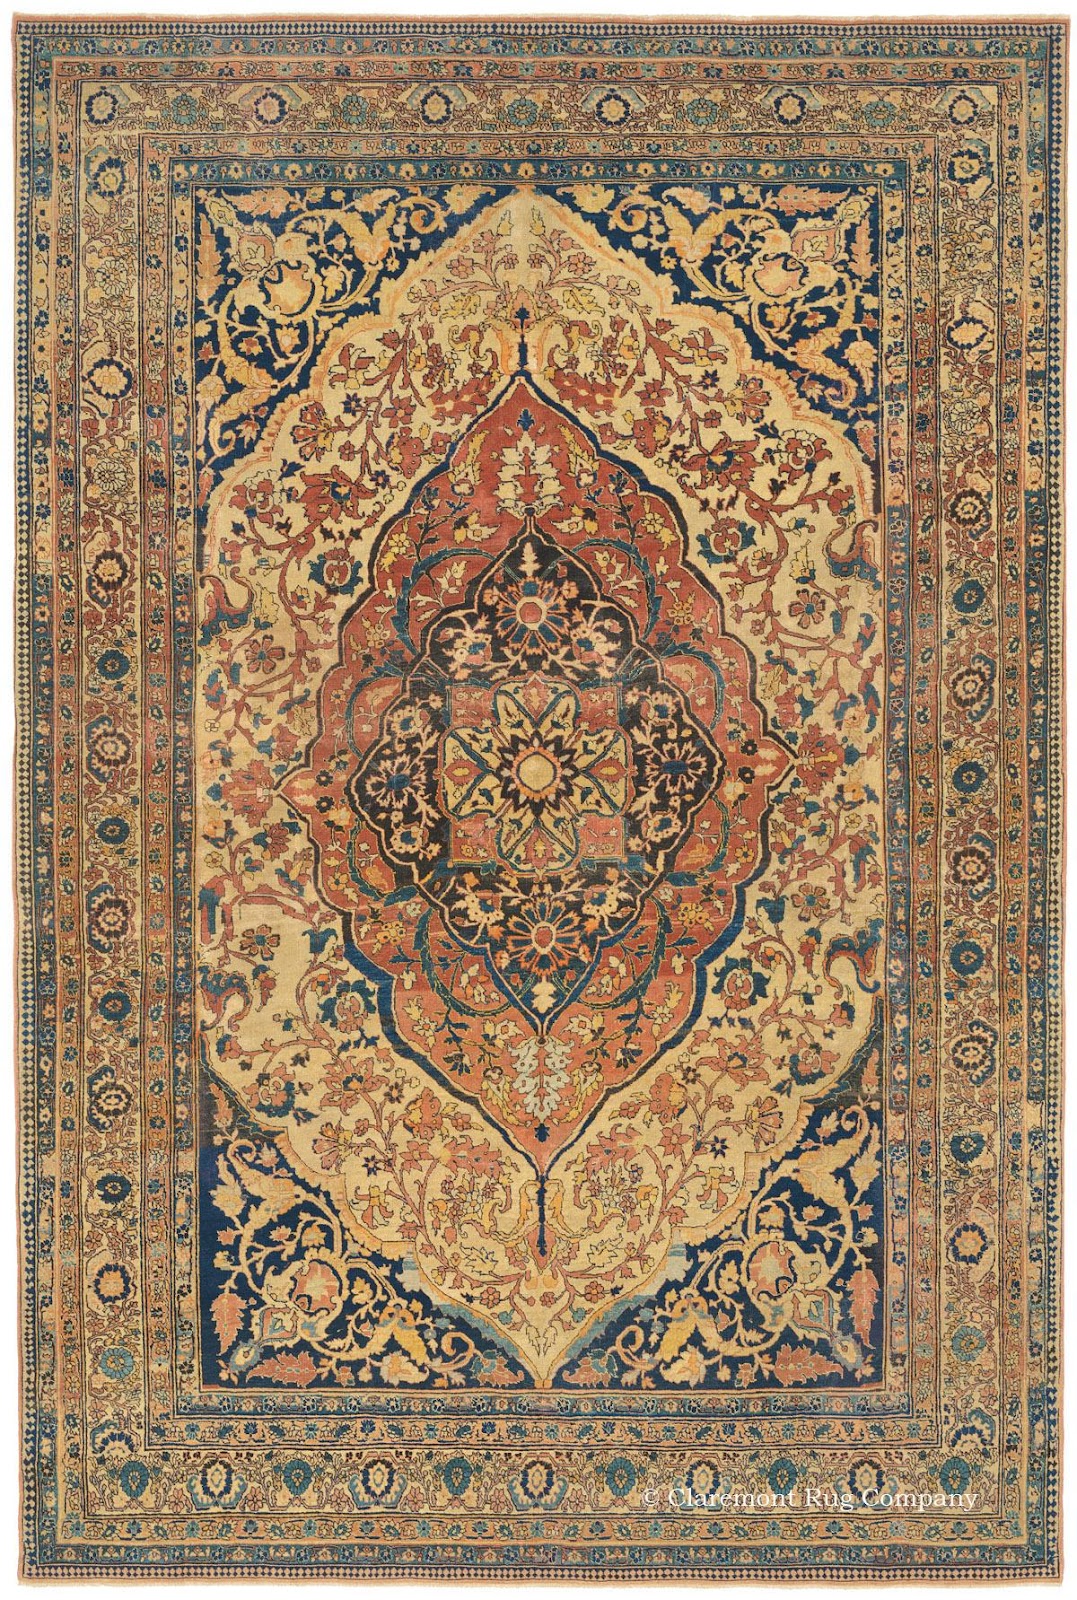 Persian Rugs Iranian Antique Persian Rugs and Carpets